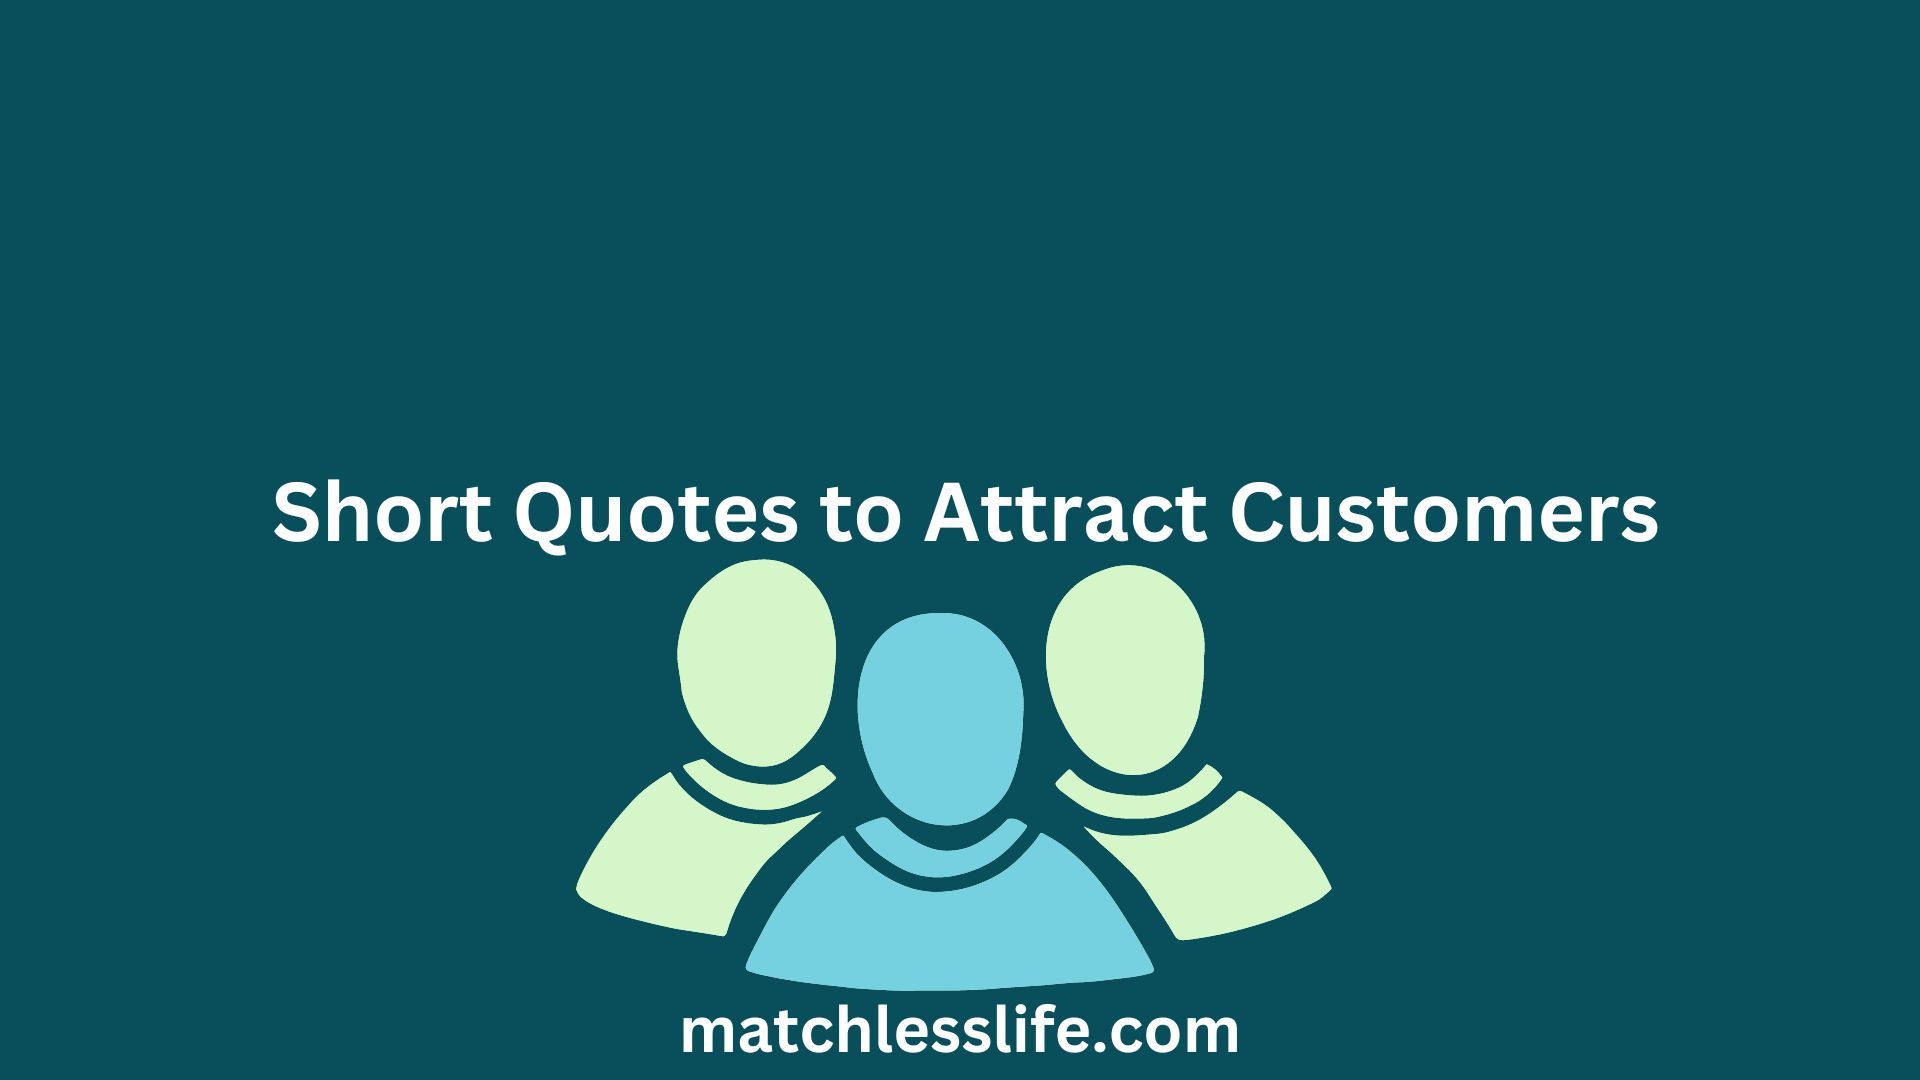 Short Quotes to Attract Customers